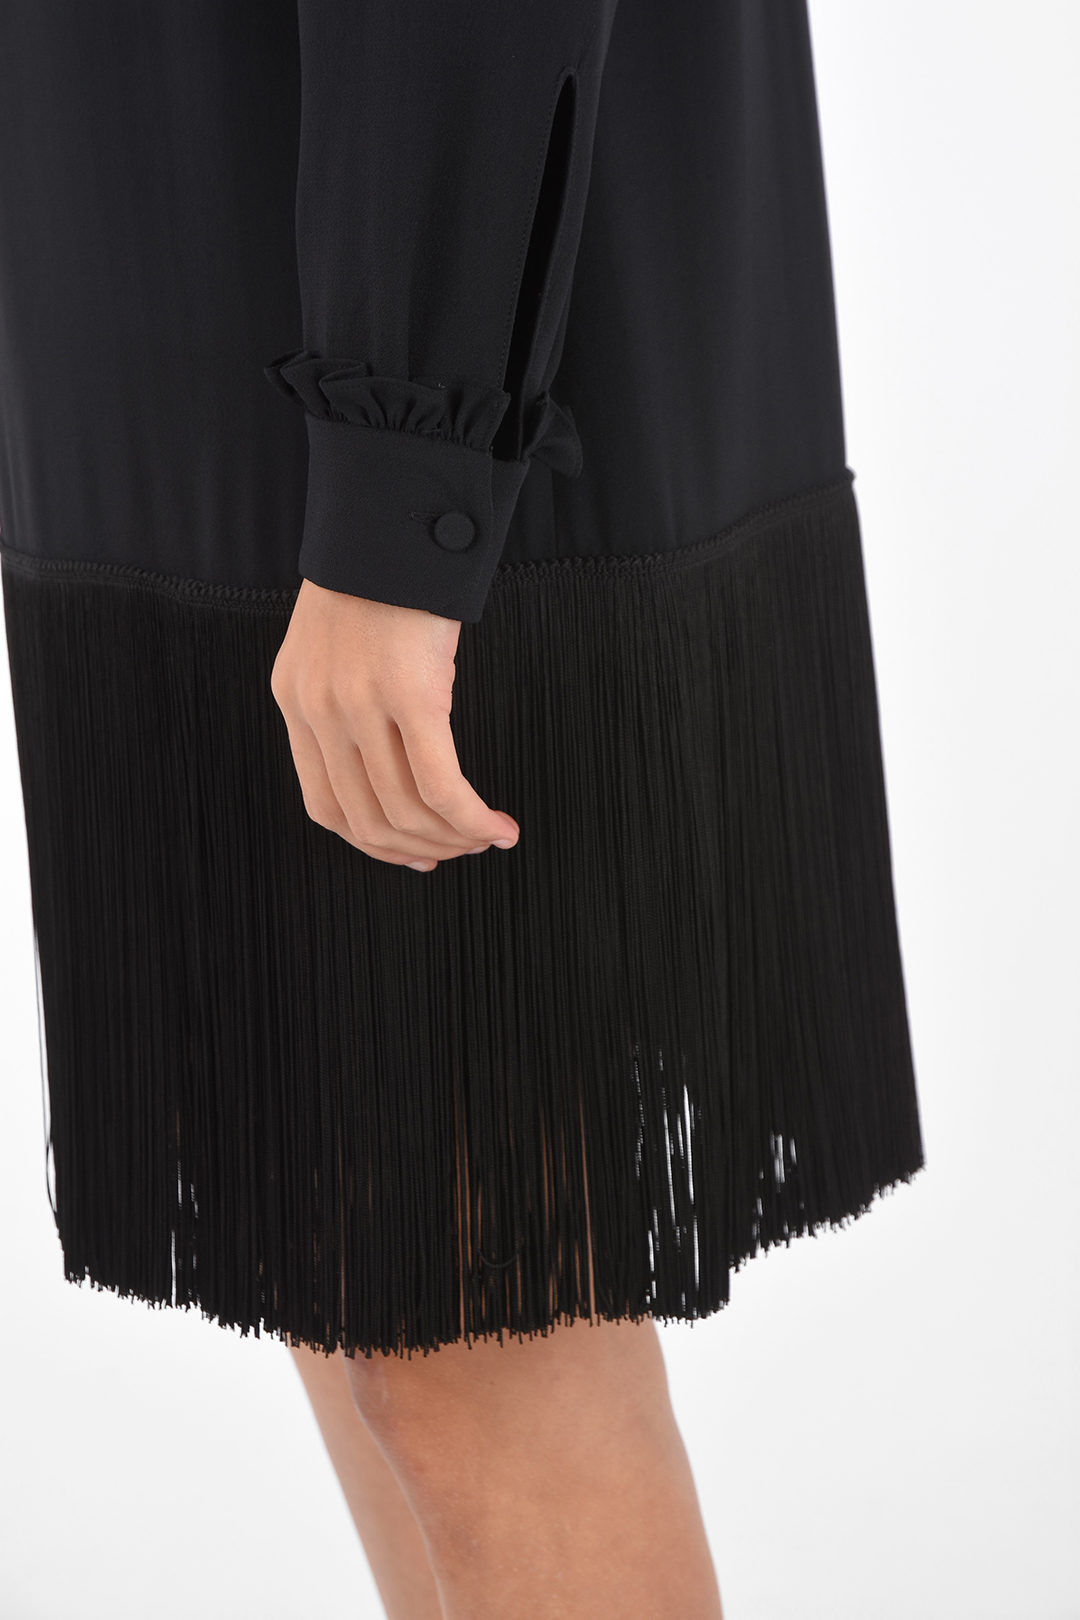 Prada Over the Knee Dress with Fringed Bottom women - Glamood Outlet